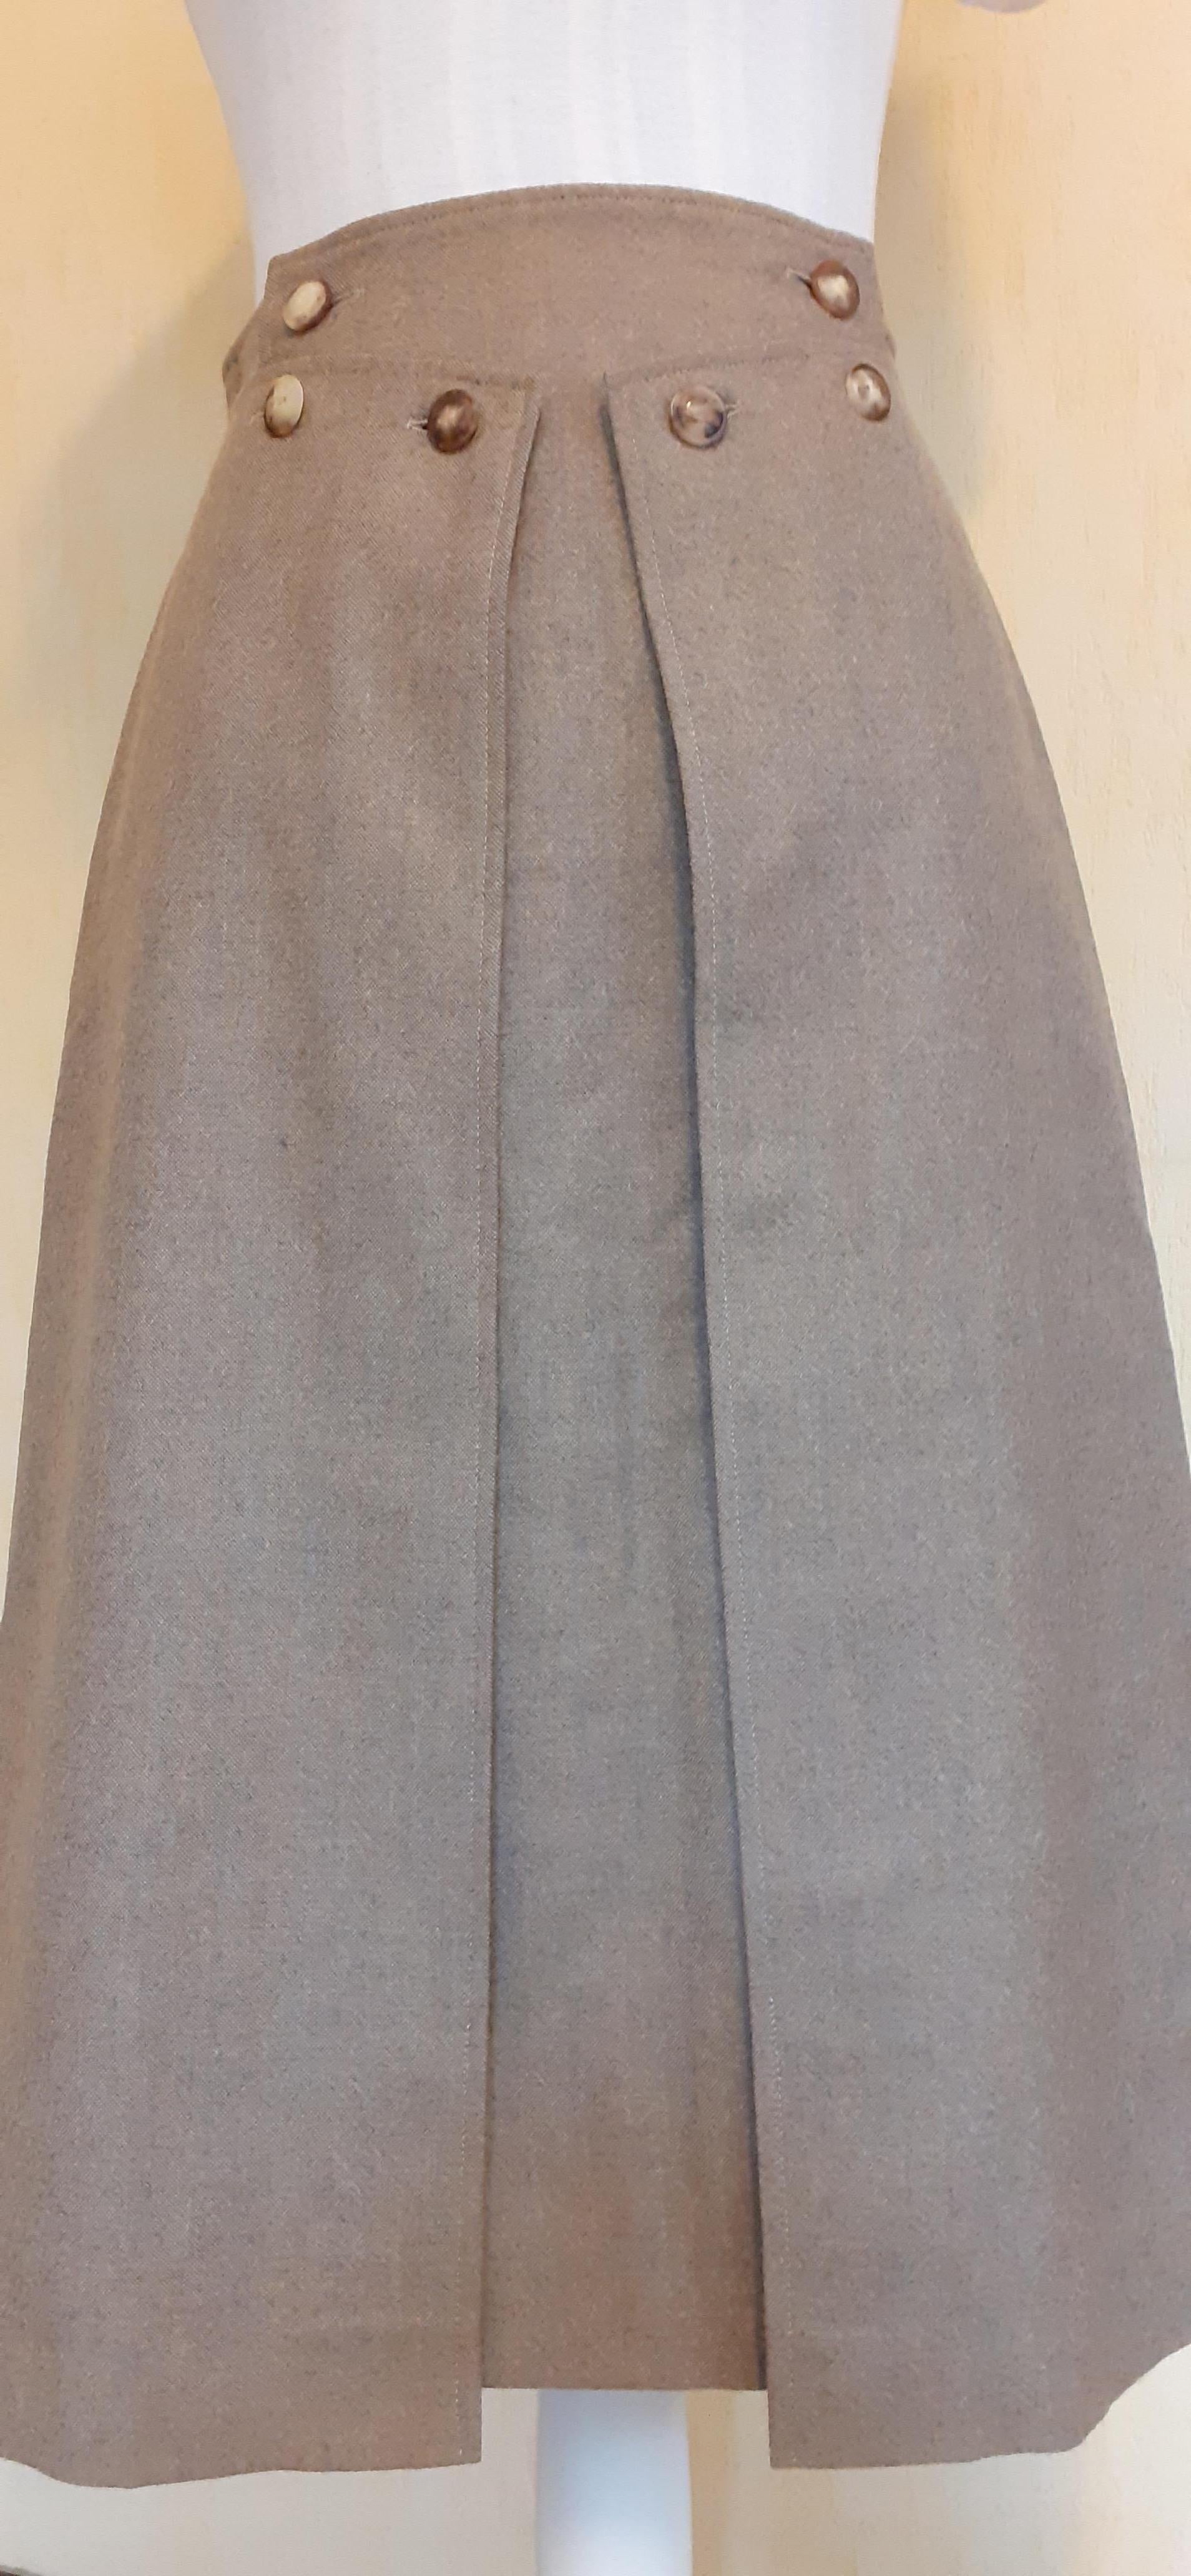 Hermès Wrap Skirt in Woll and Cashmere Size 36 Small For Sale 3